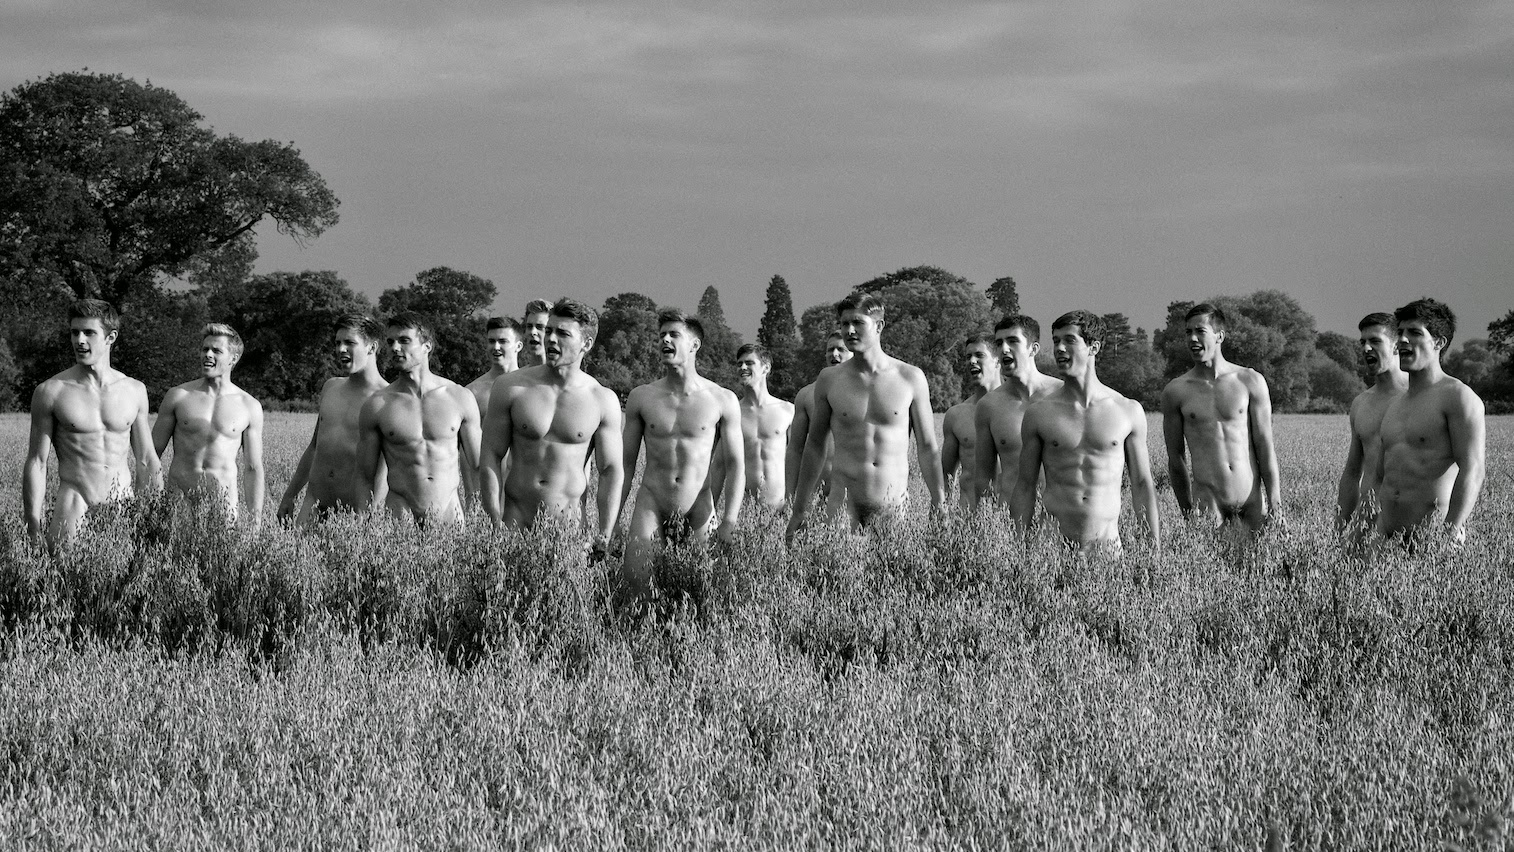 INTERVIEW: Warwick Naked Rowers.